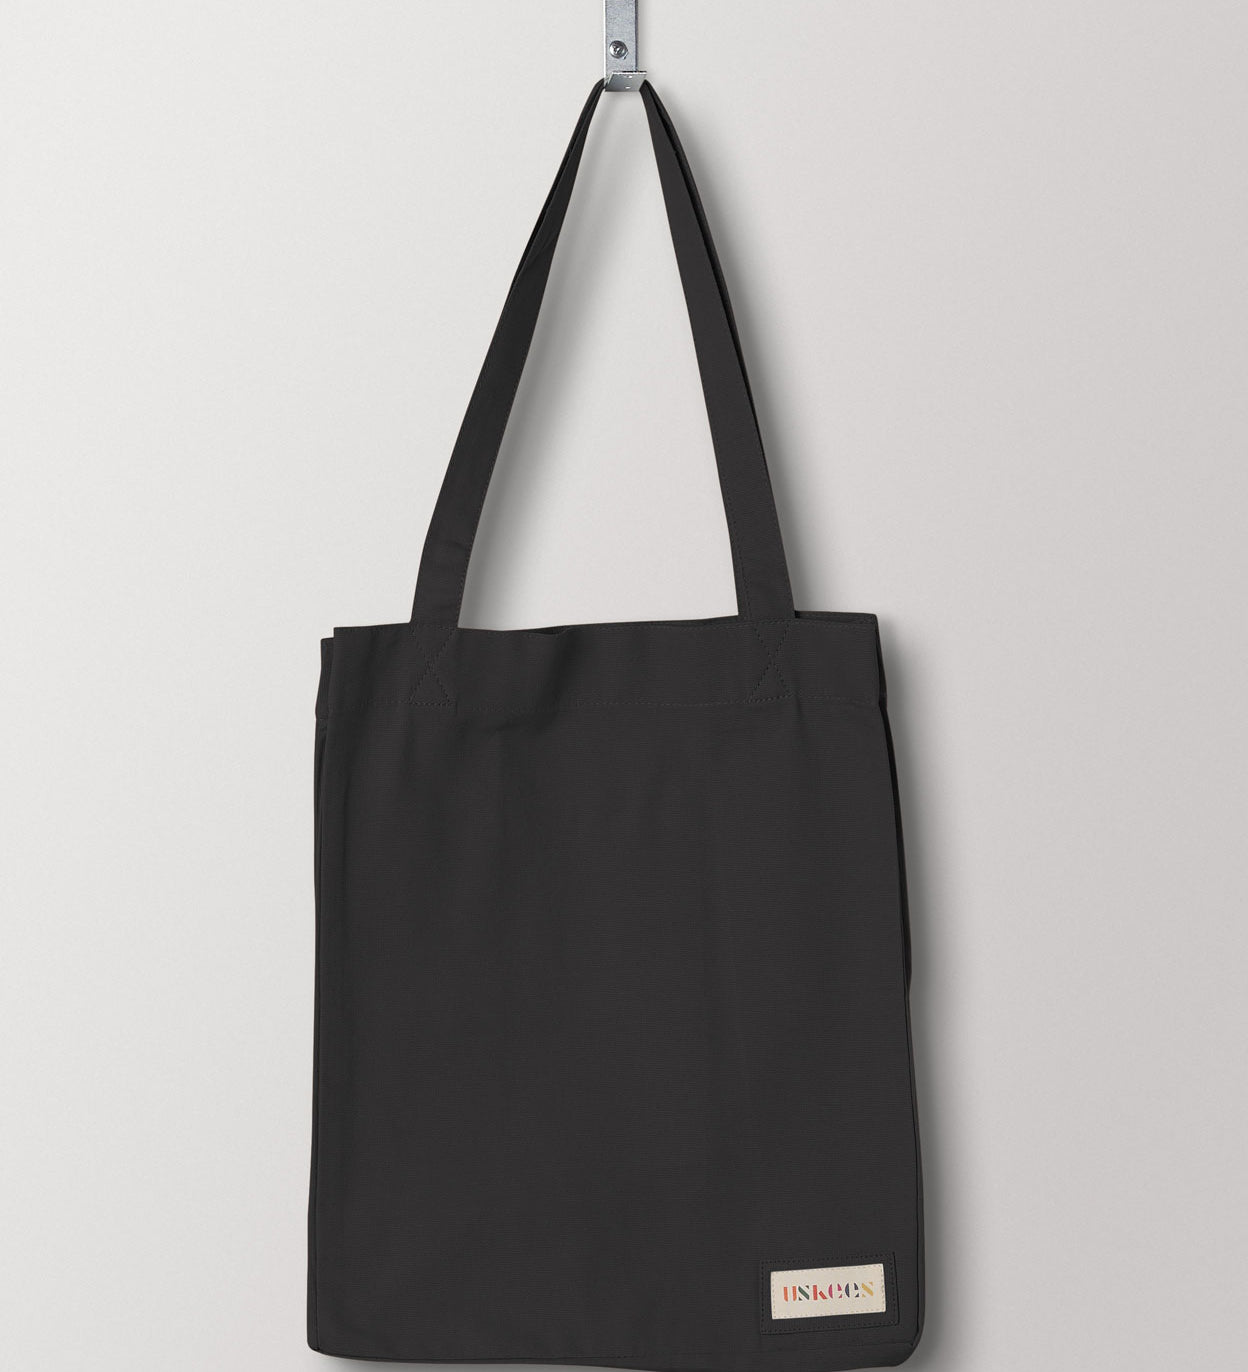 Full front hanging shot of Uskees #4002 small charcoal-grey tote bag, showing double handles and Uskees woven logo.